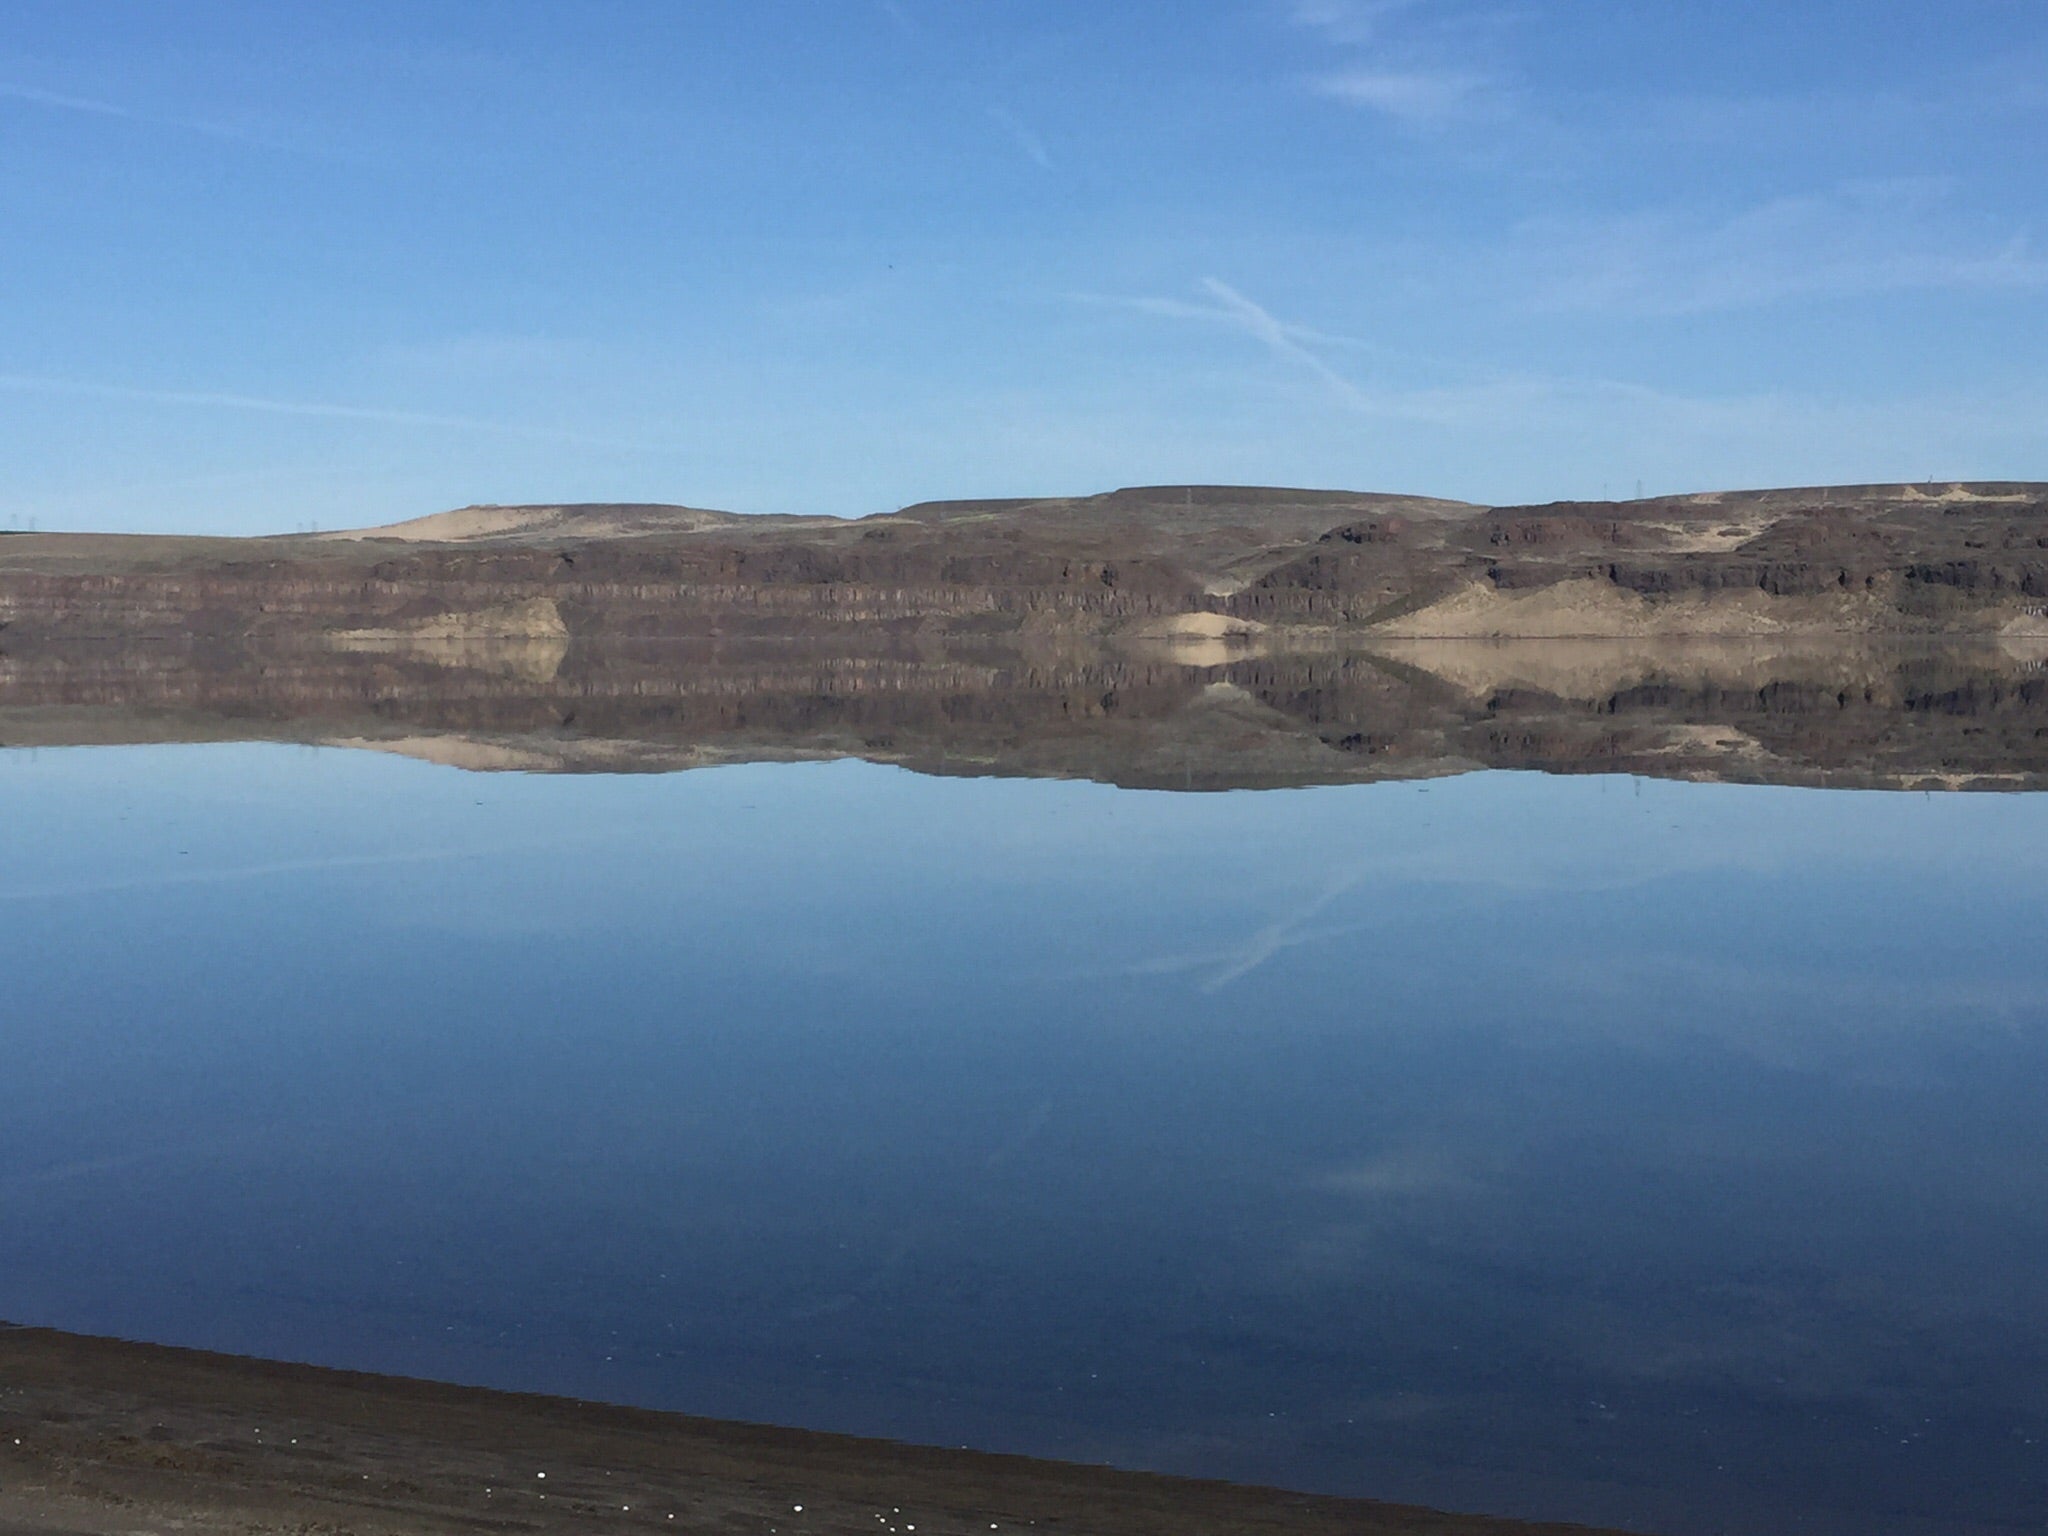 Camper submitted image from Ginkgo Petrified Forest State Park - 2